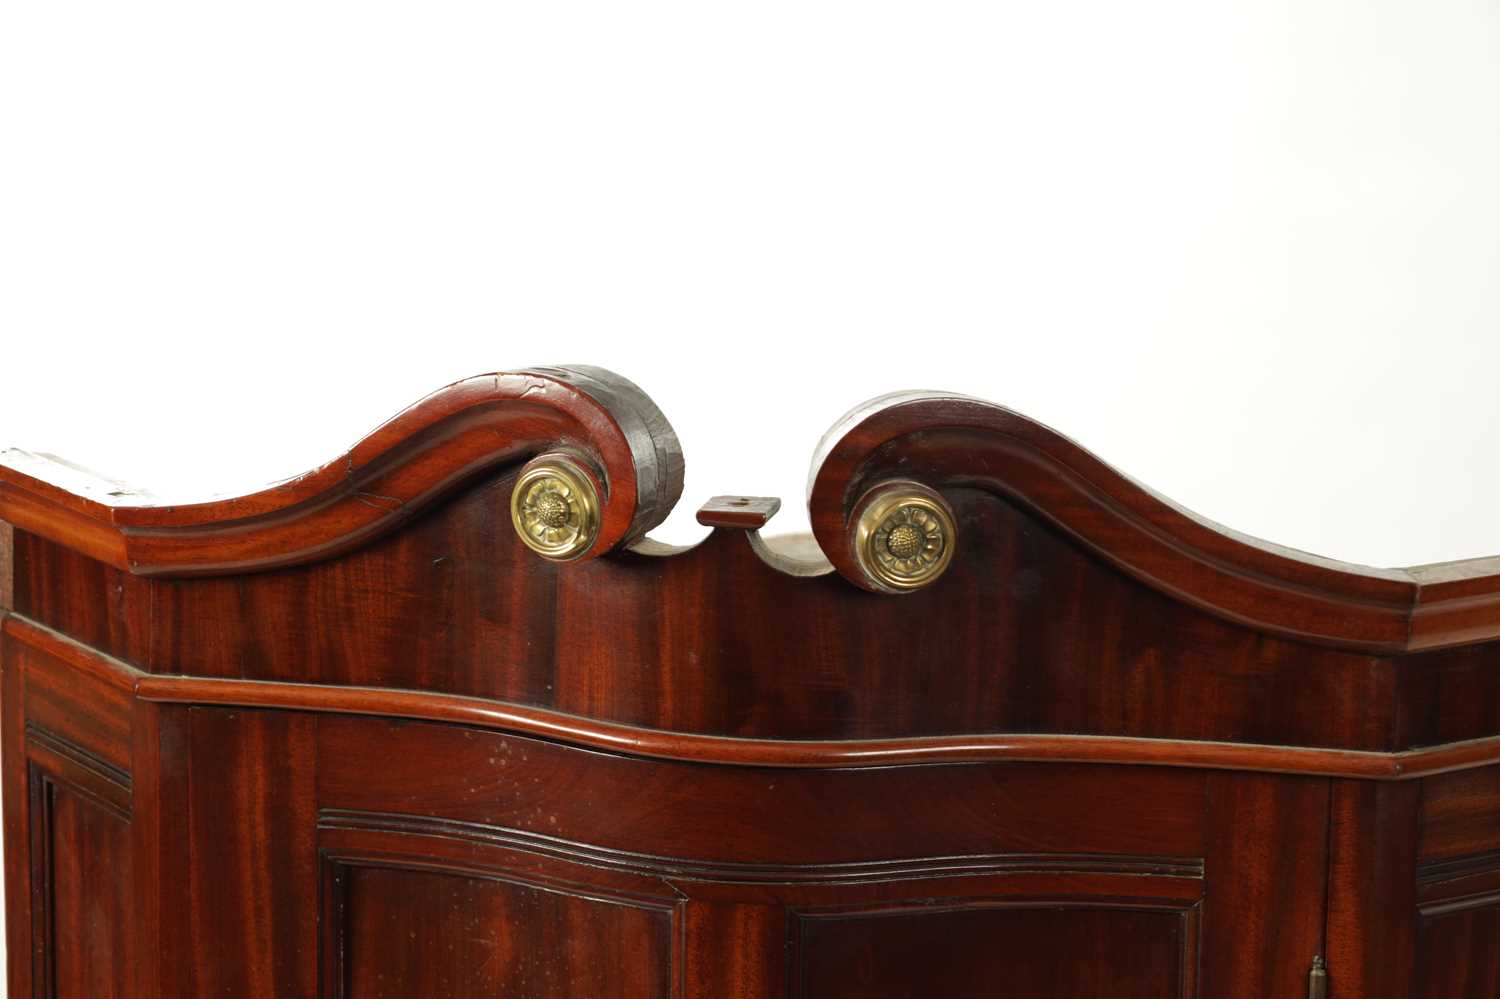 A 19TH CENTURY MAHOGANY SERPENTINE FRONTED HANGING CORNER CUPBOARD IN THE MANNER OF DUNCAN PHYFE - Image 2 of 4